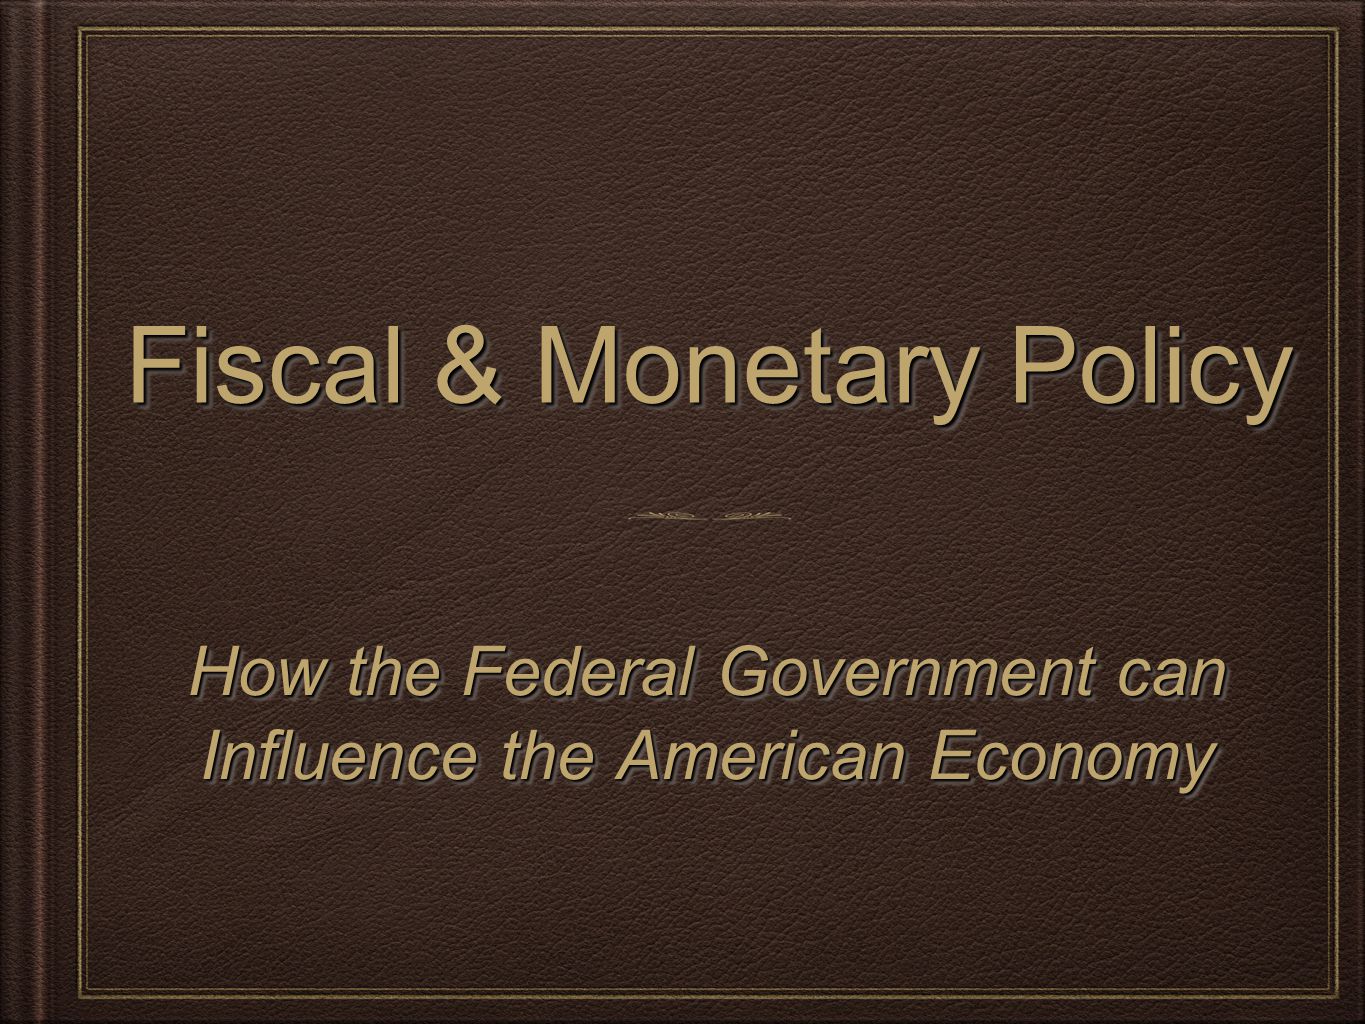 Fiscal & Monetary Policy How the Federal Government can Influence the American Economy How the Federal Government can Influence the American Economy